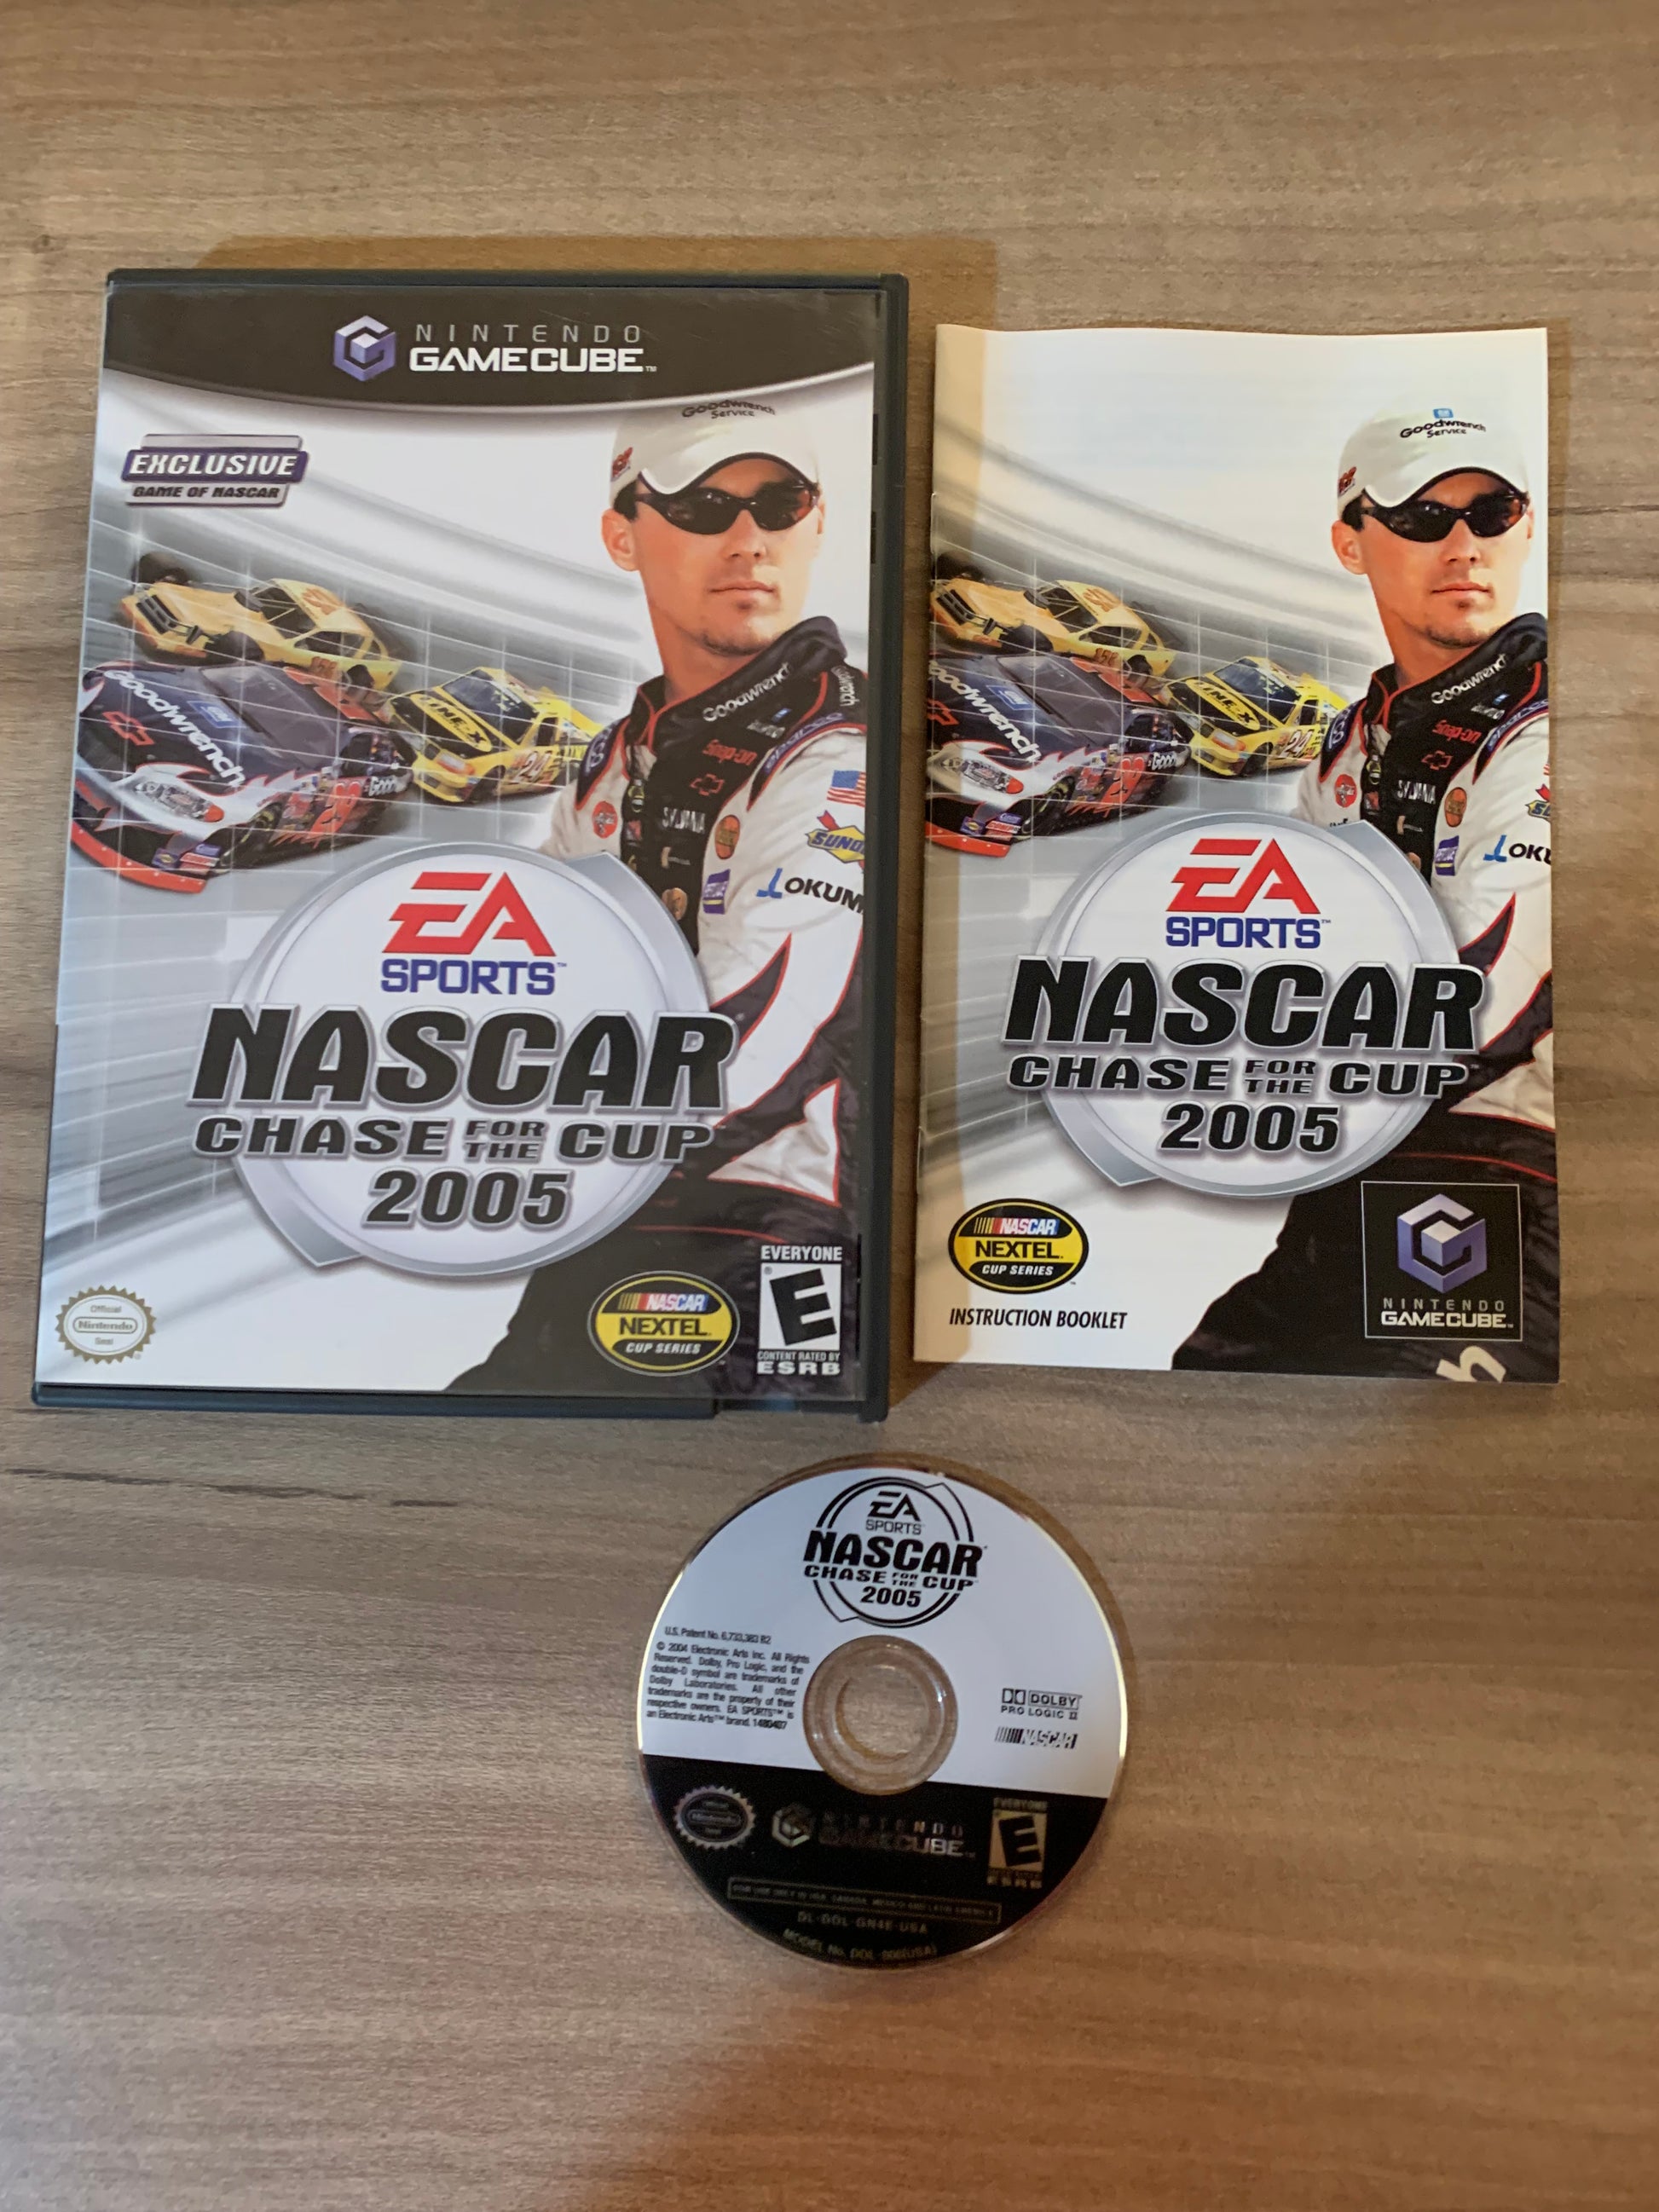 PiXEL-RETRO.COM : NINTENDO GAMECUBE COMPLETE CIB BOX MANUAL GAME NTSC NASCAR CHASE FOR THE CUP 2005